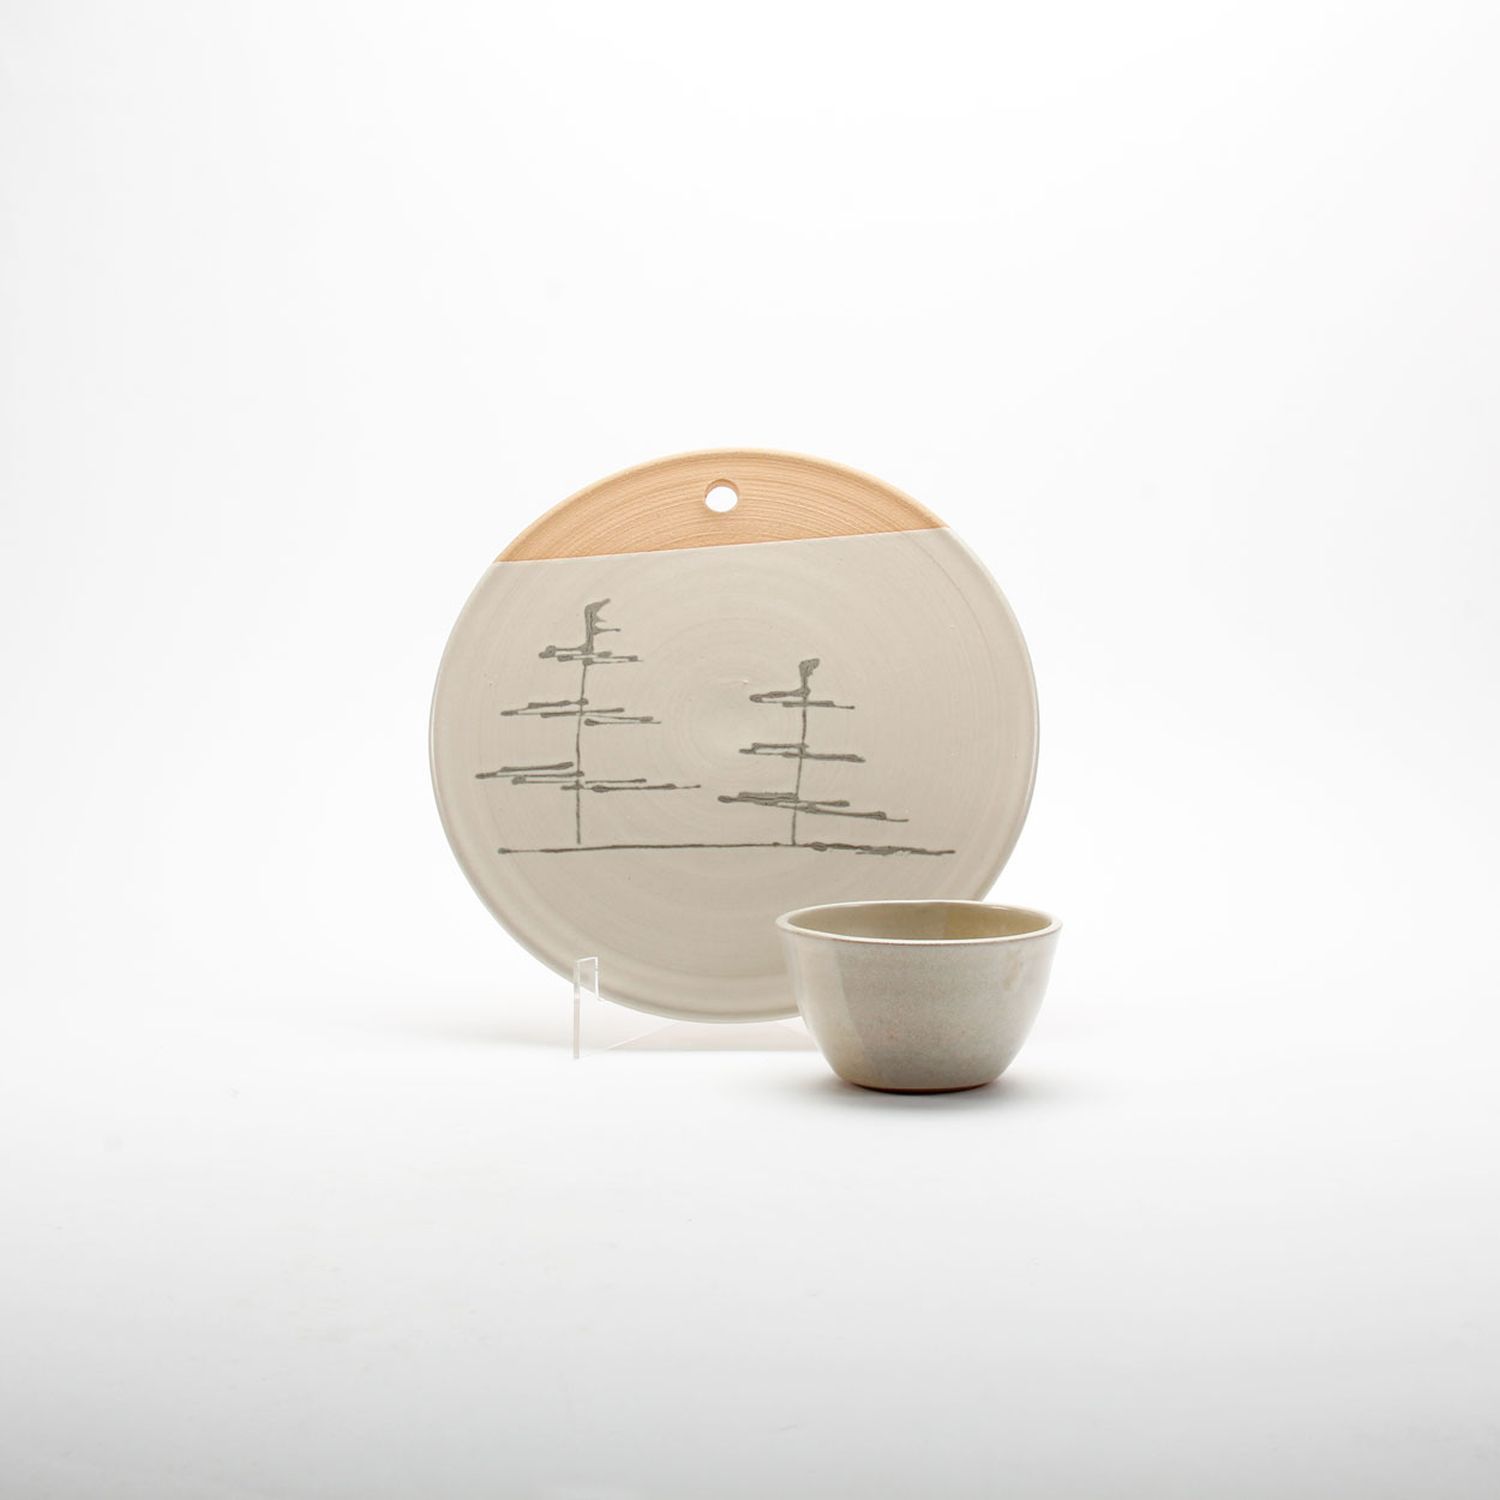 Shiralee Pottery: Cheese Plate with Small Bowl (Set-of-Two) Product Image 1 of 2